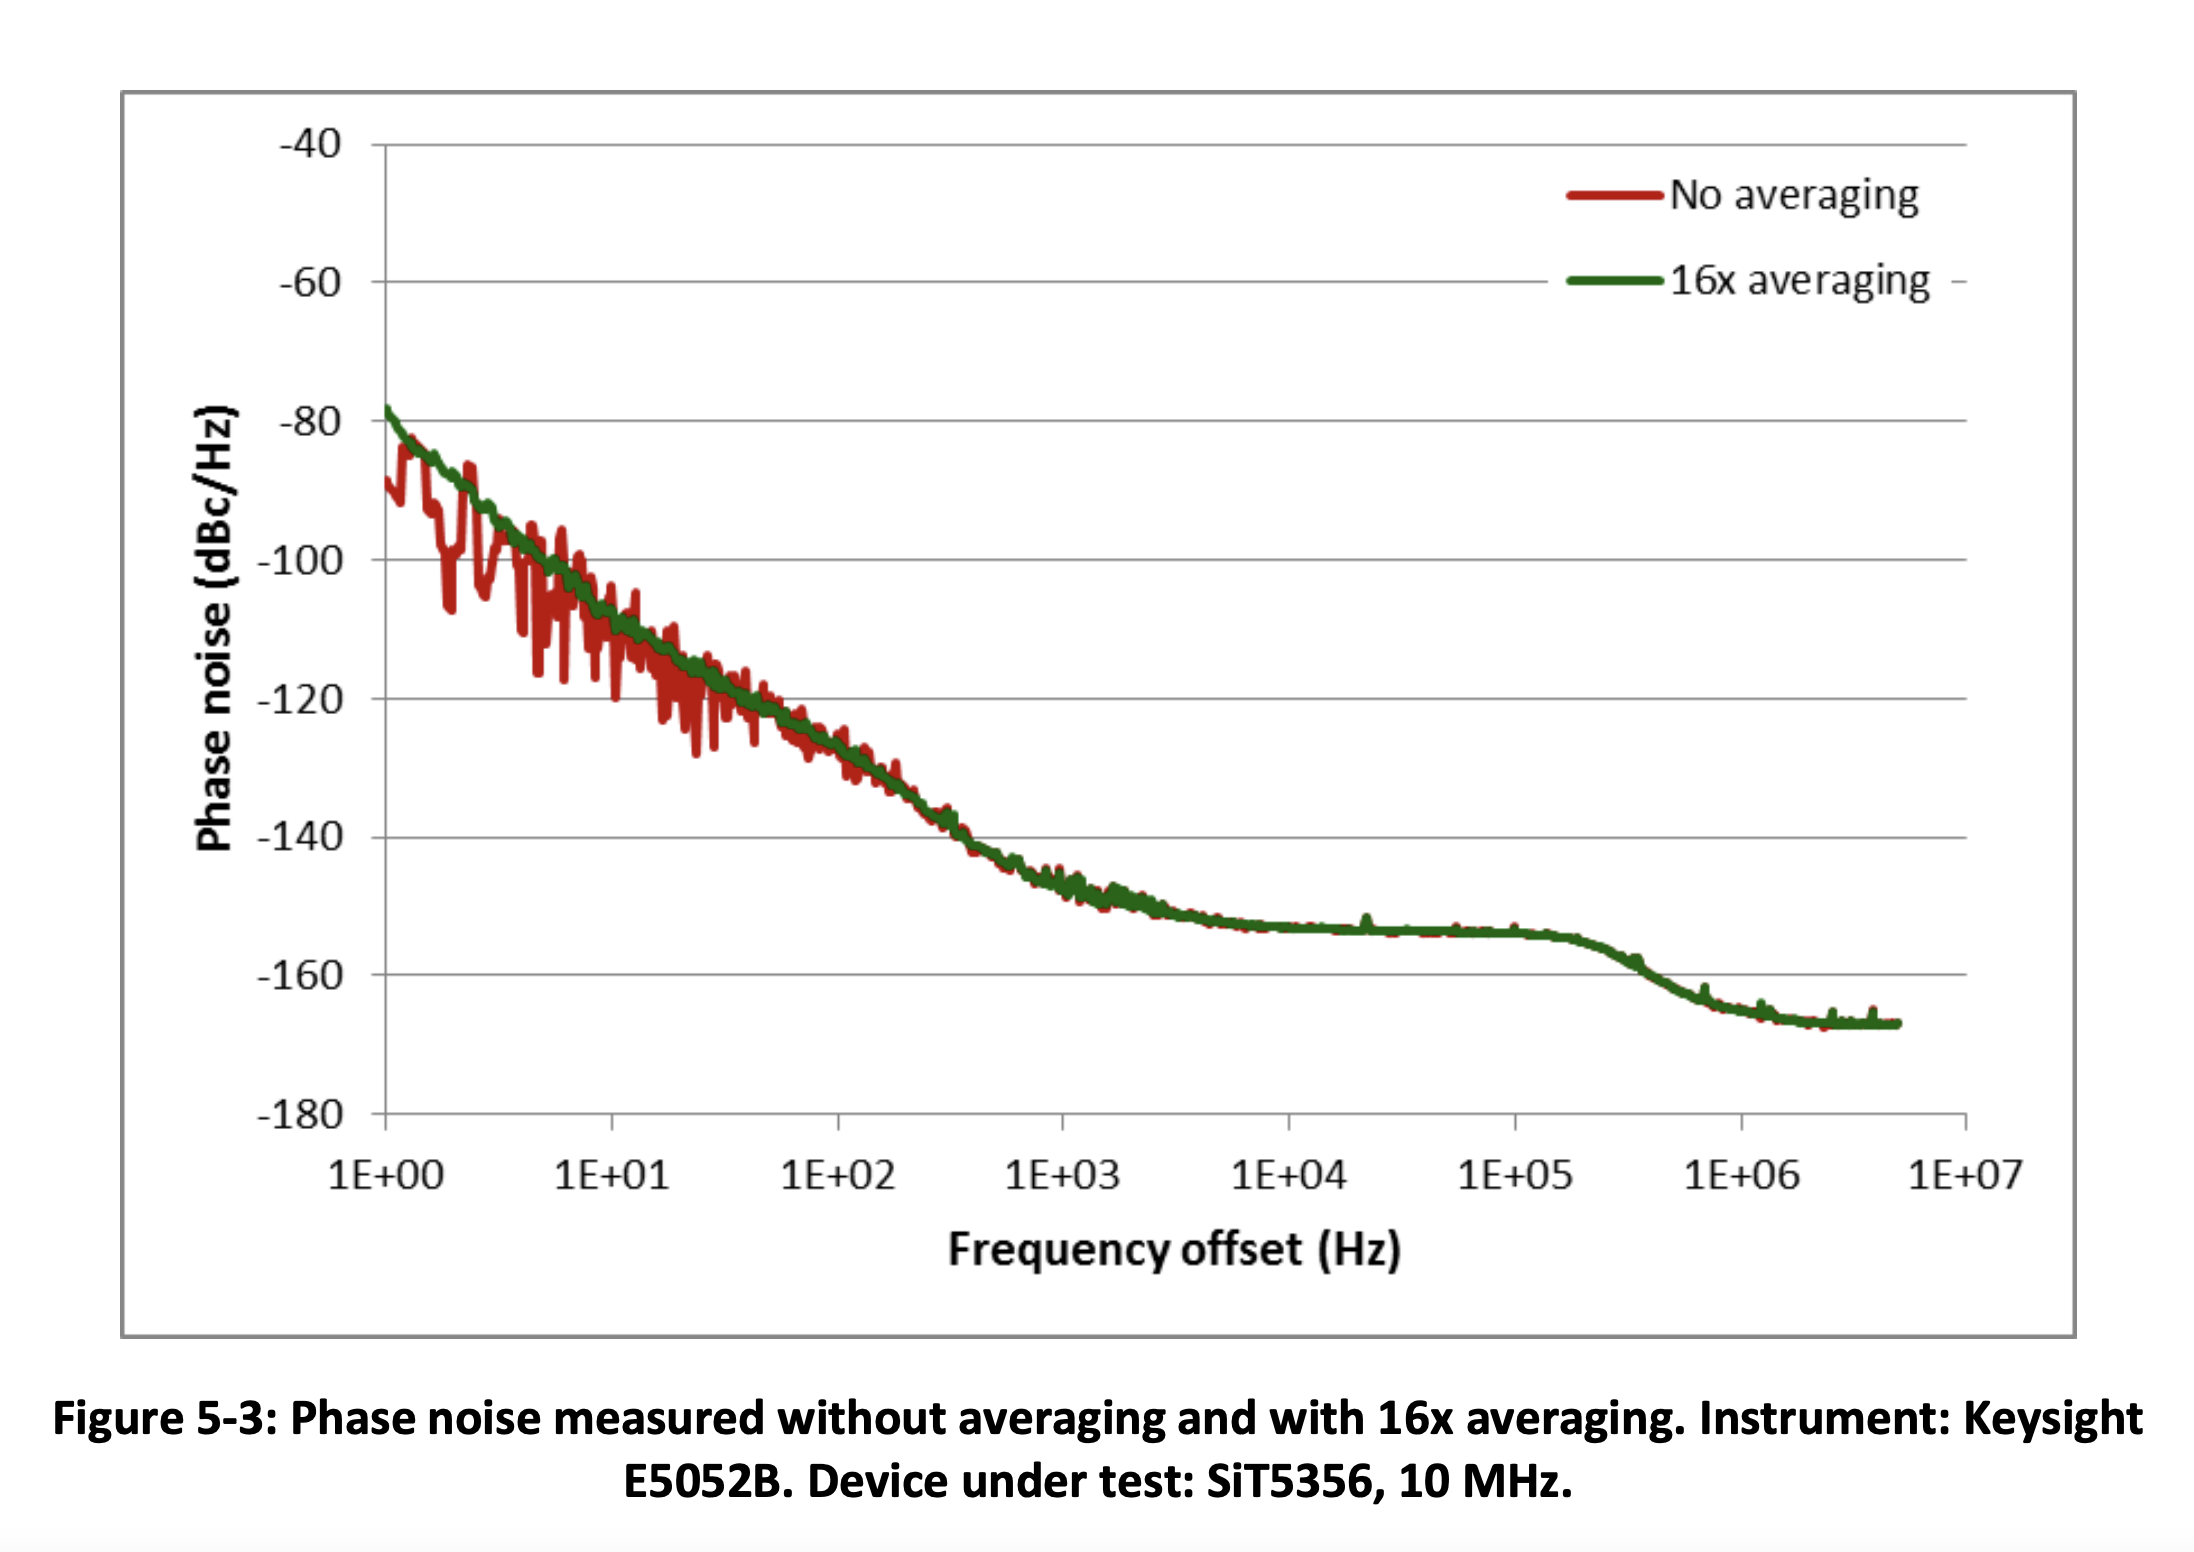 Figure 5-3 Phase noise measured without averaging and with 16x averaging